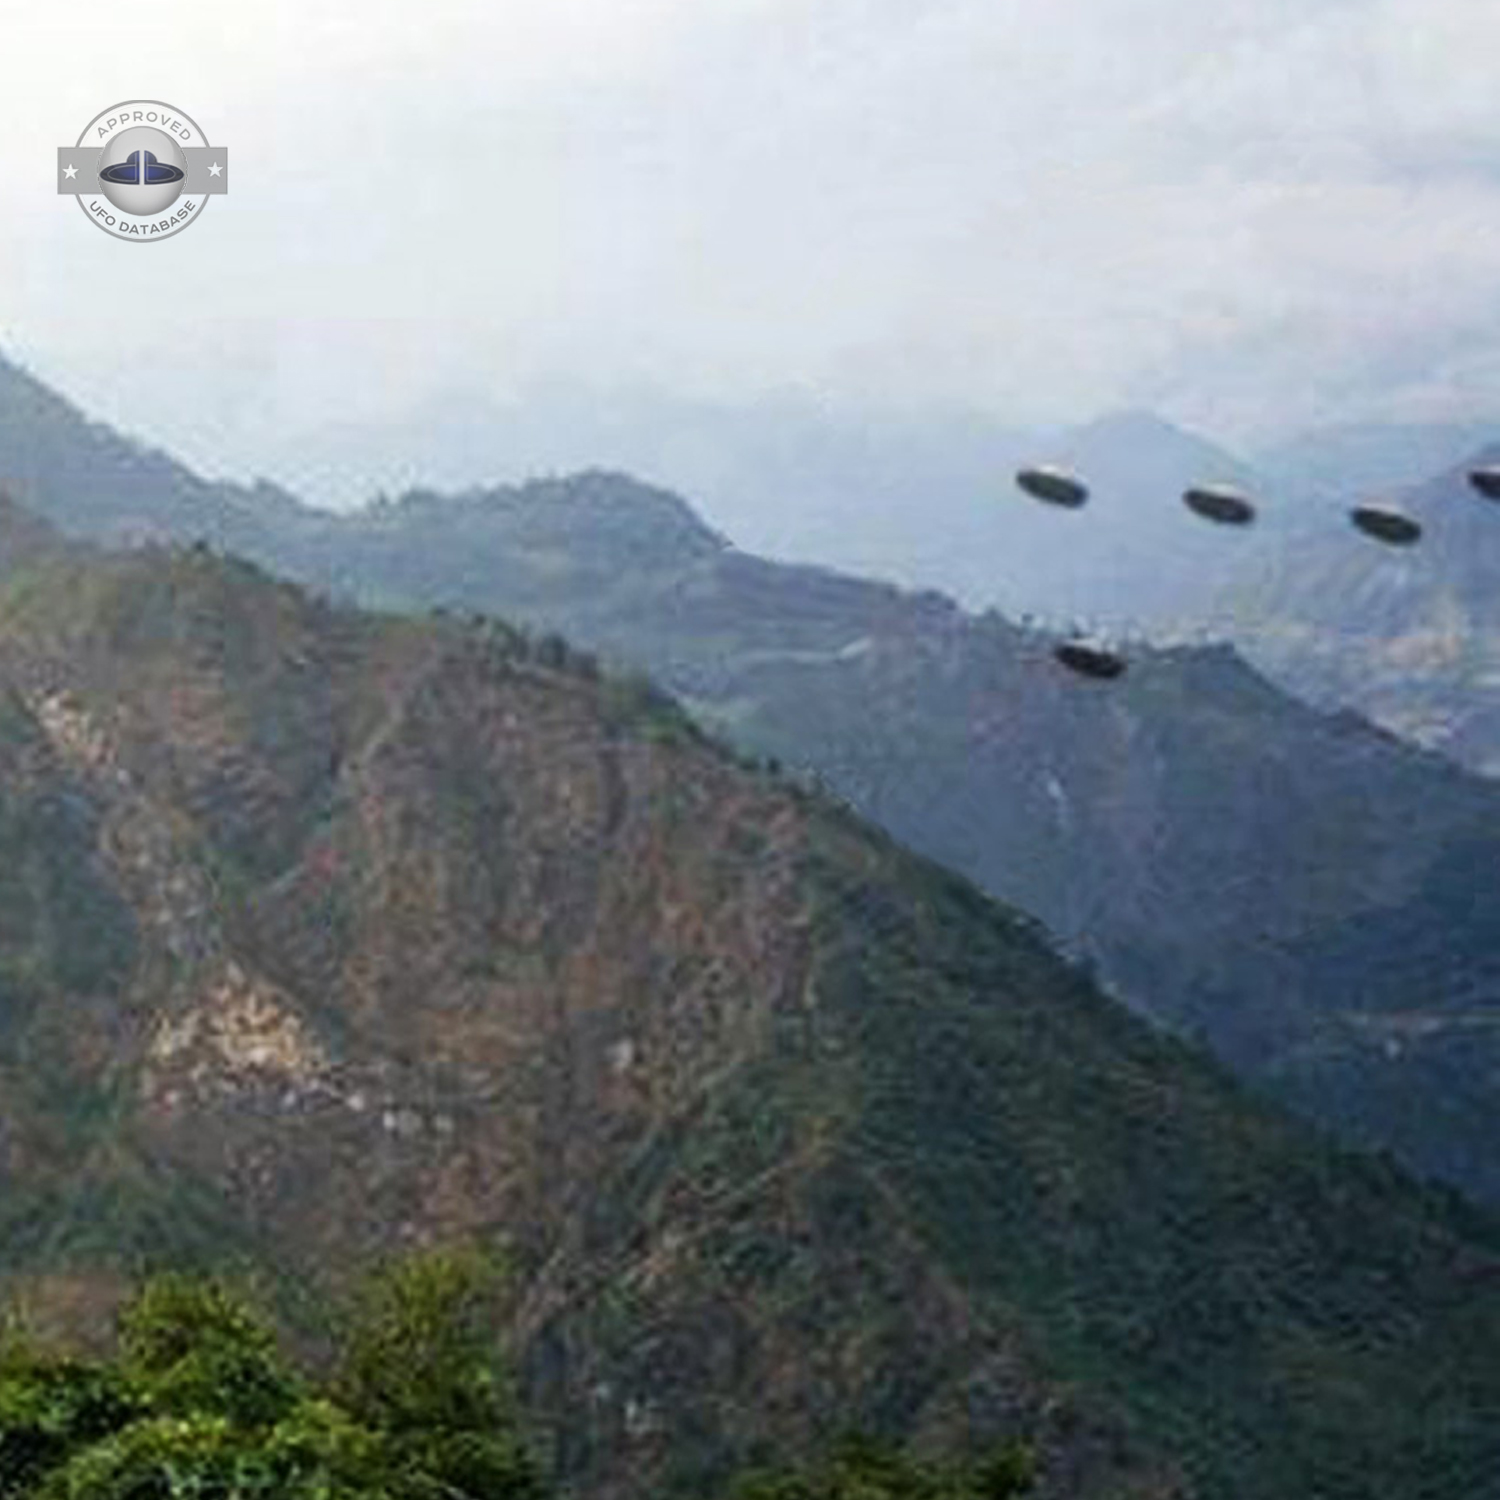 Fleet of 5 UFOs flying in precise formation Hills of Sombaria Gangtok UFO Picture #202-4